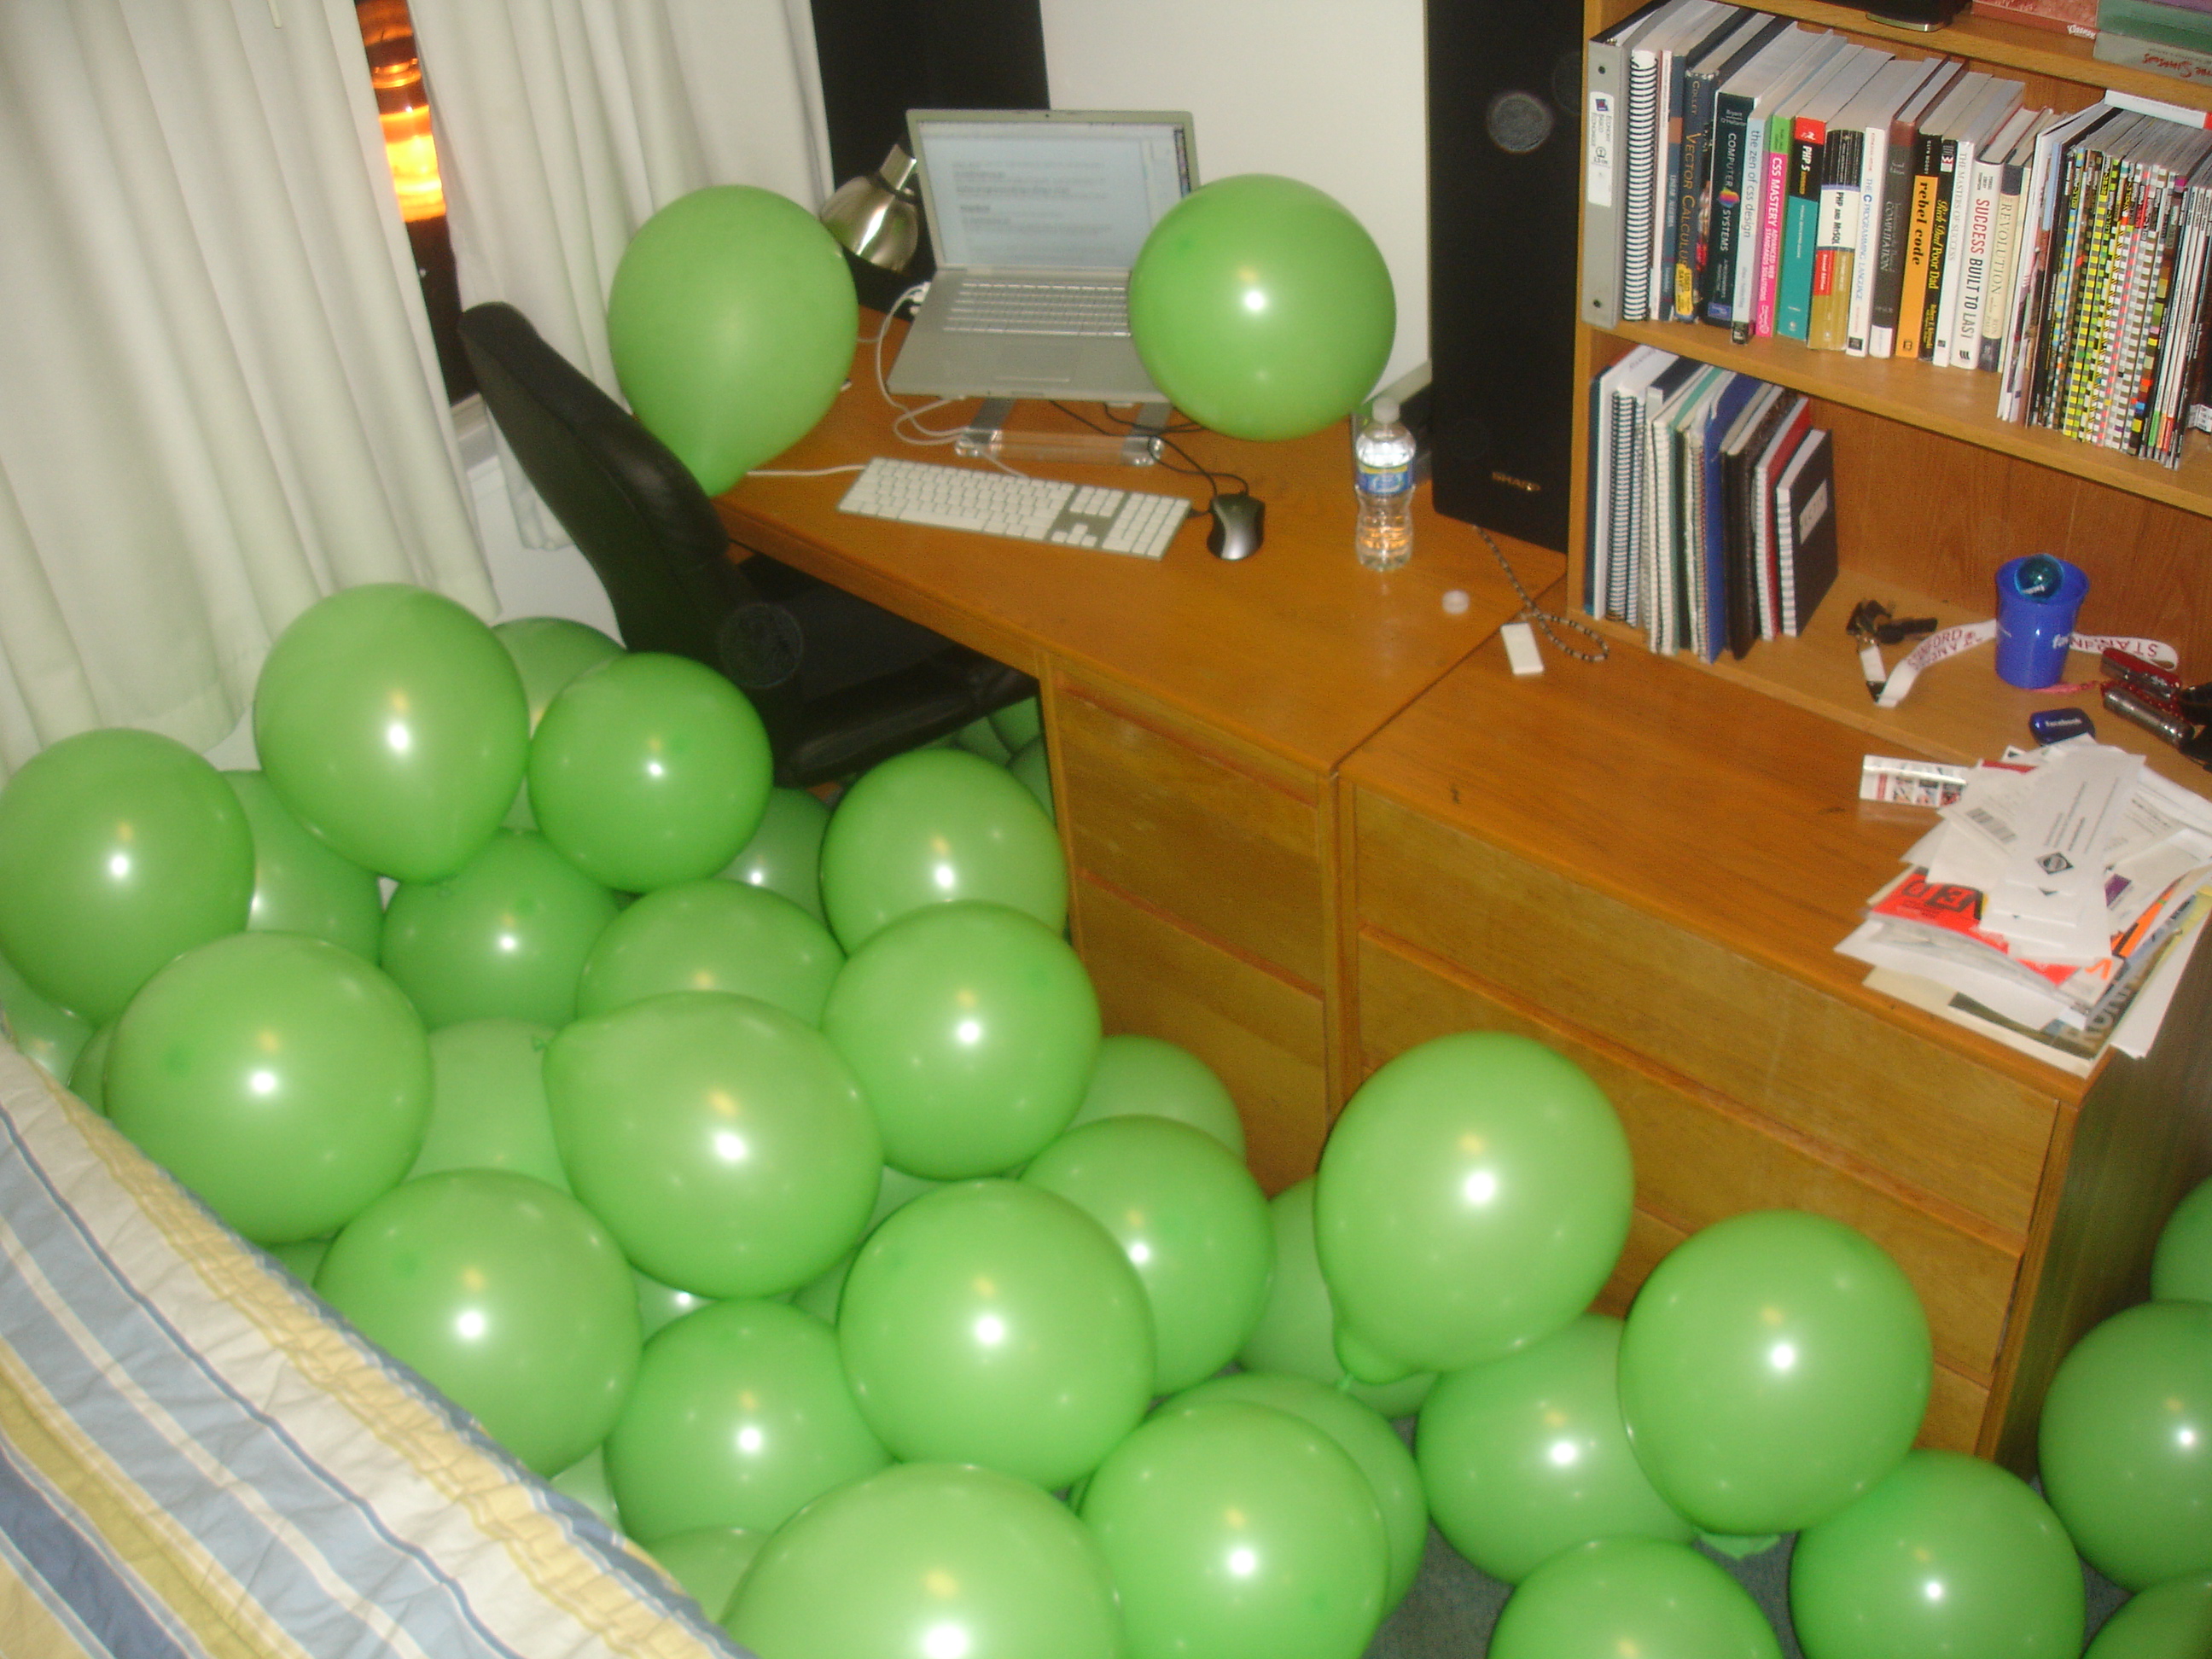 Bloons improve my work environment!